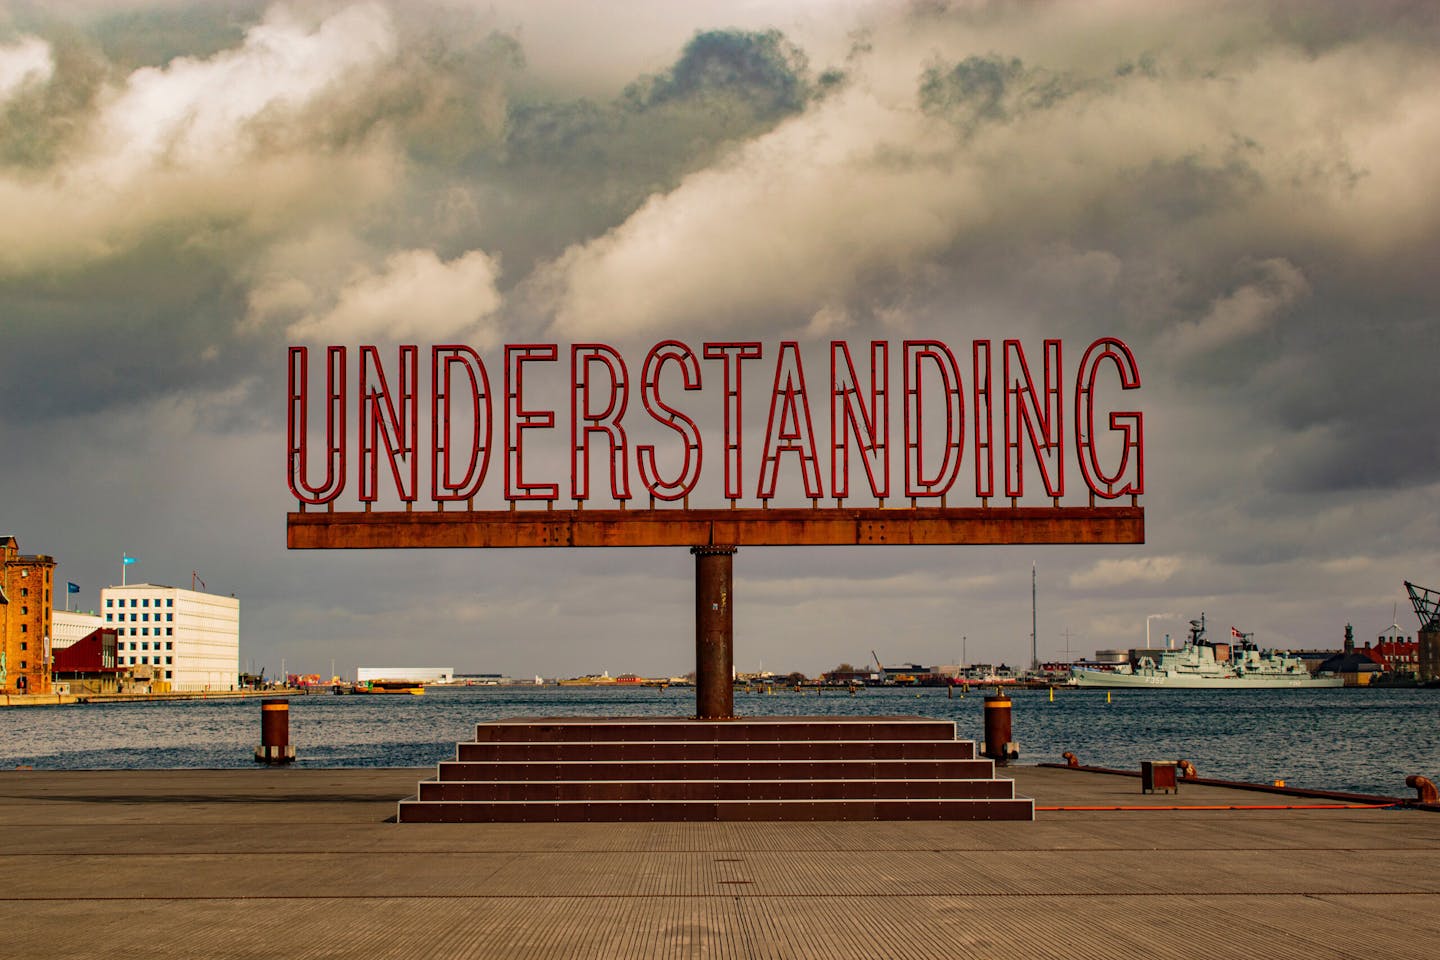 A big sign saying "Understanding"